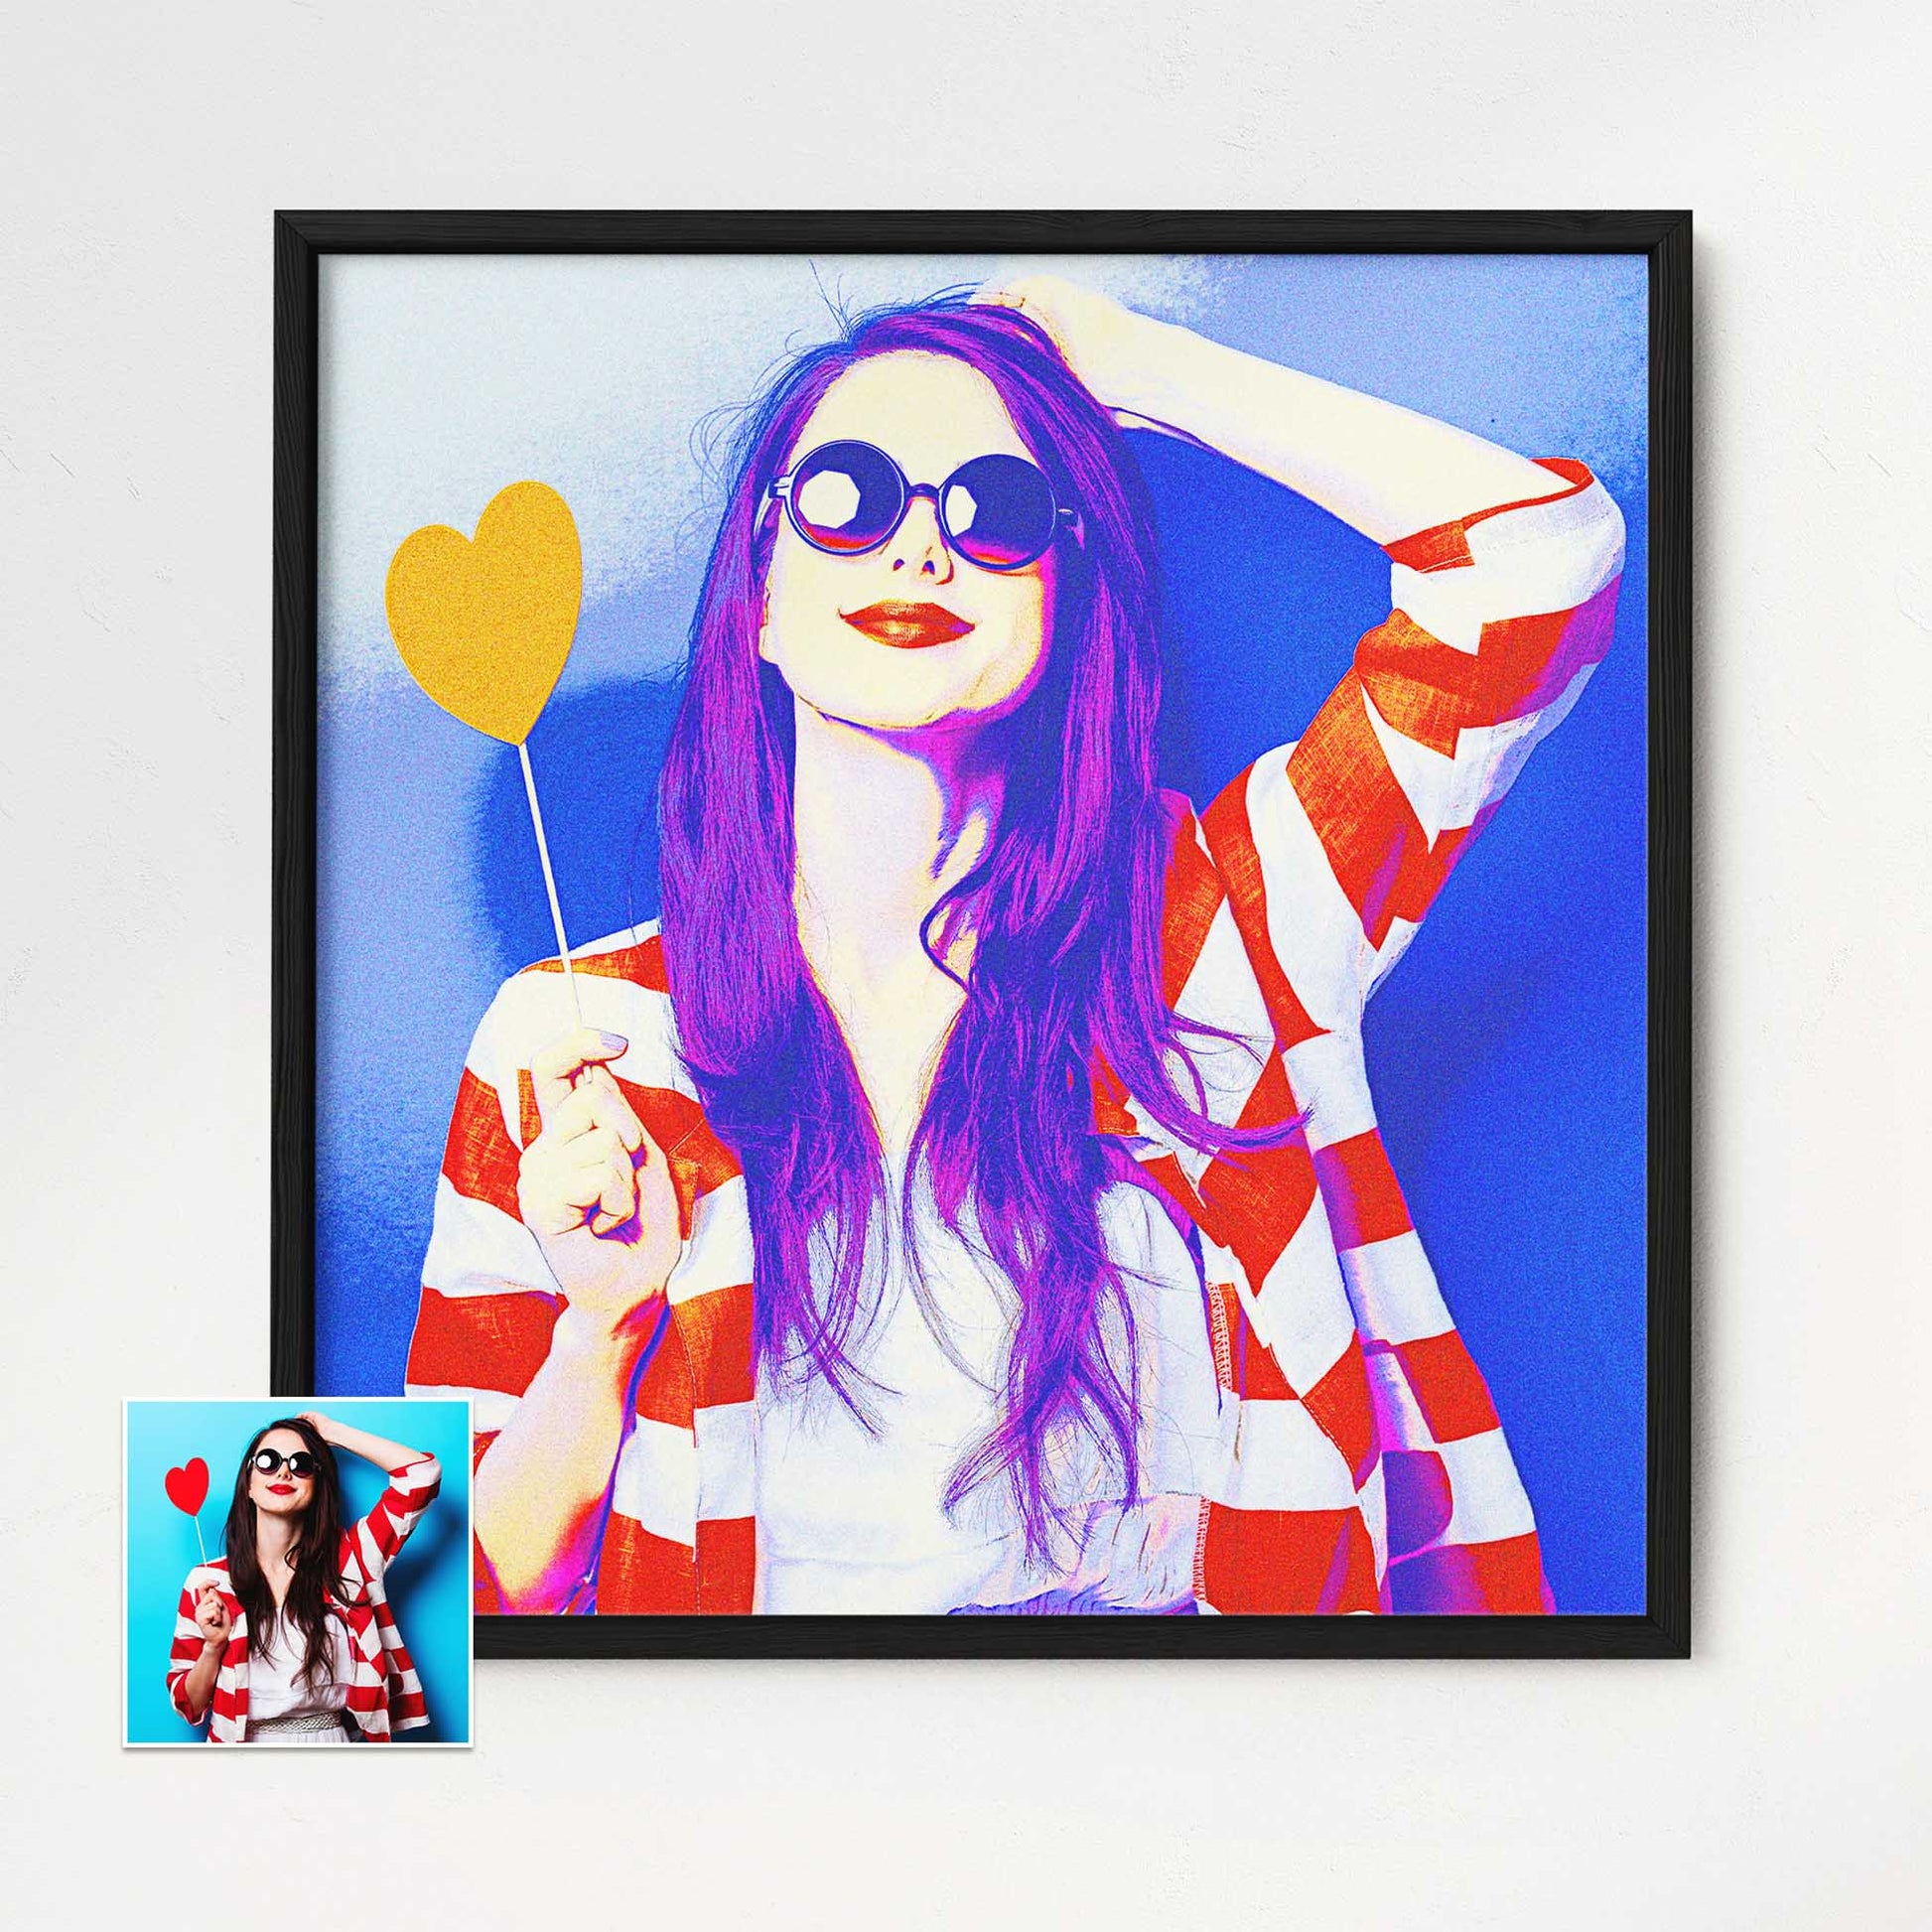 Personalised Blue & Purple Framed Print is a stunning addition to your interior decor. Its bold and vibrant colors create a lively and energetic atmosphere. Printed from your photo, it captures the sharp and vivid details